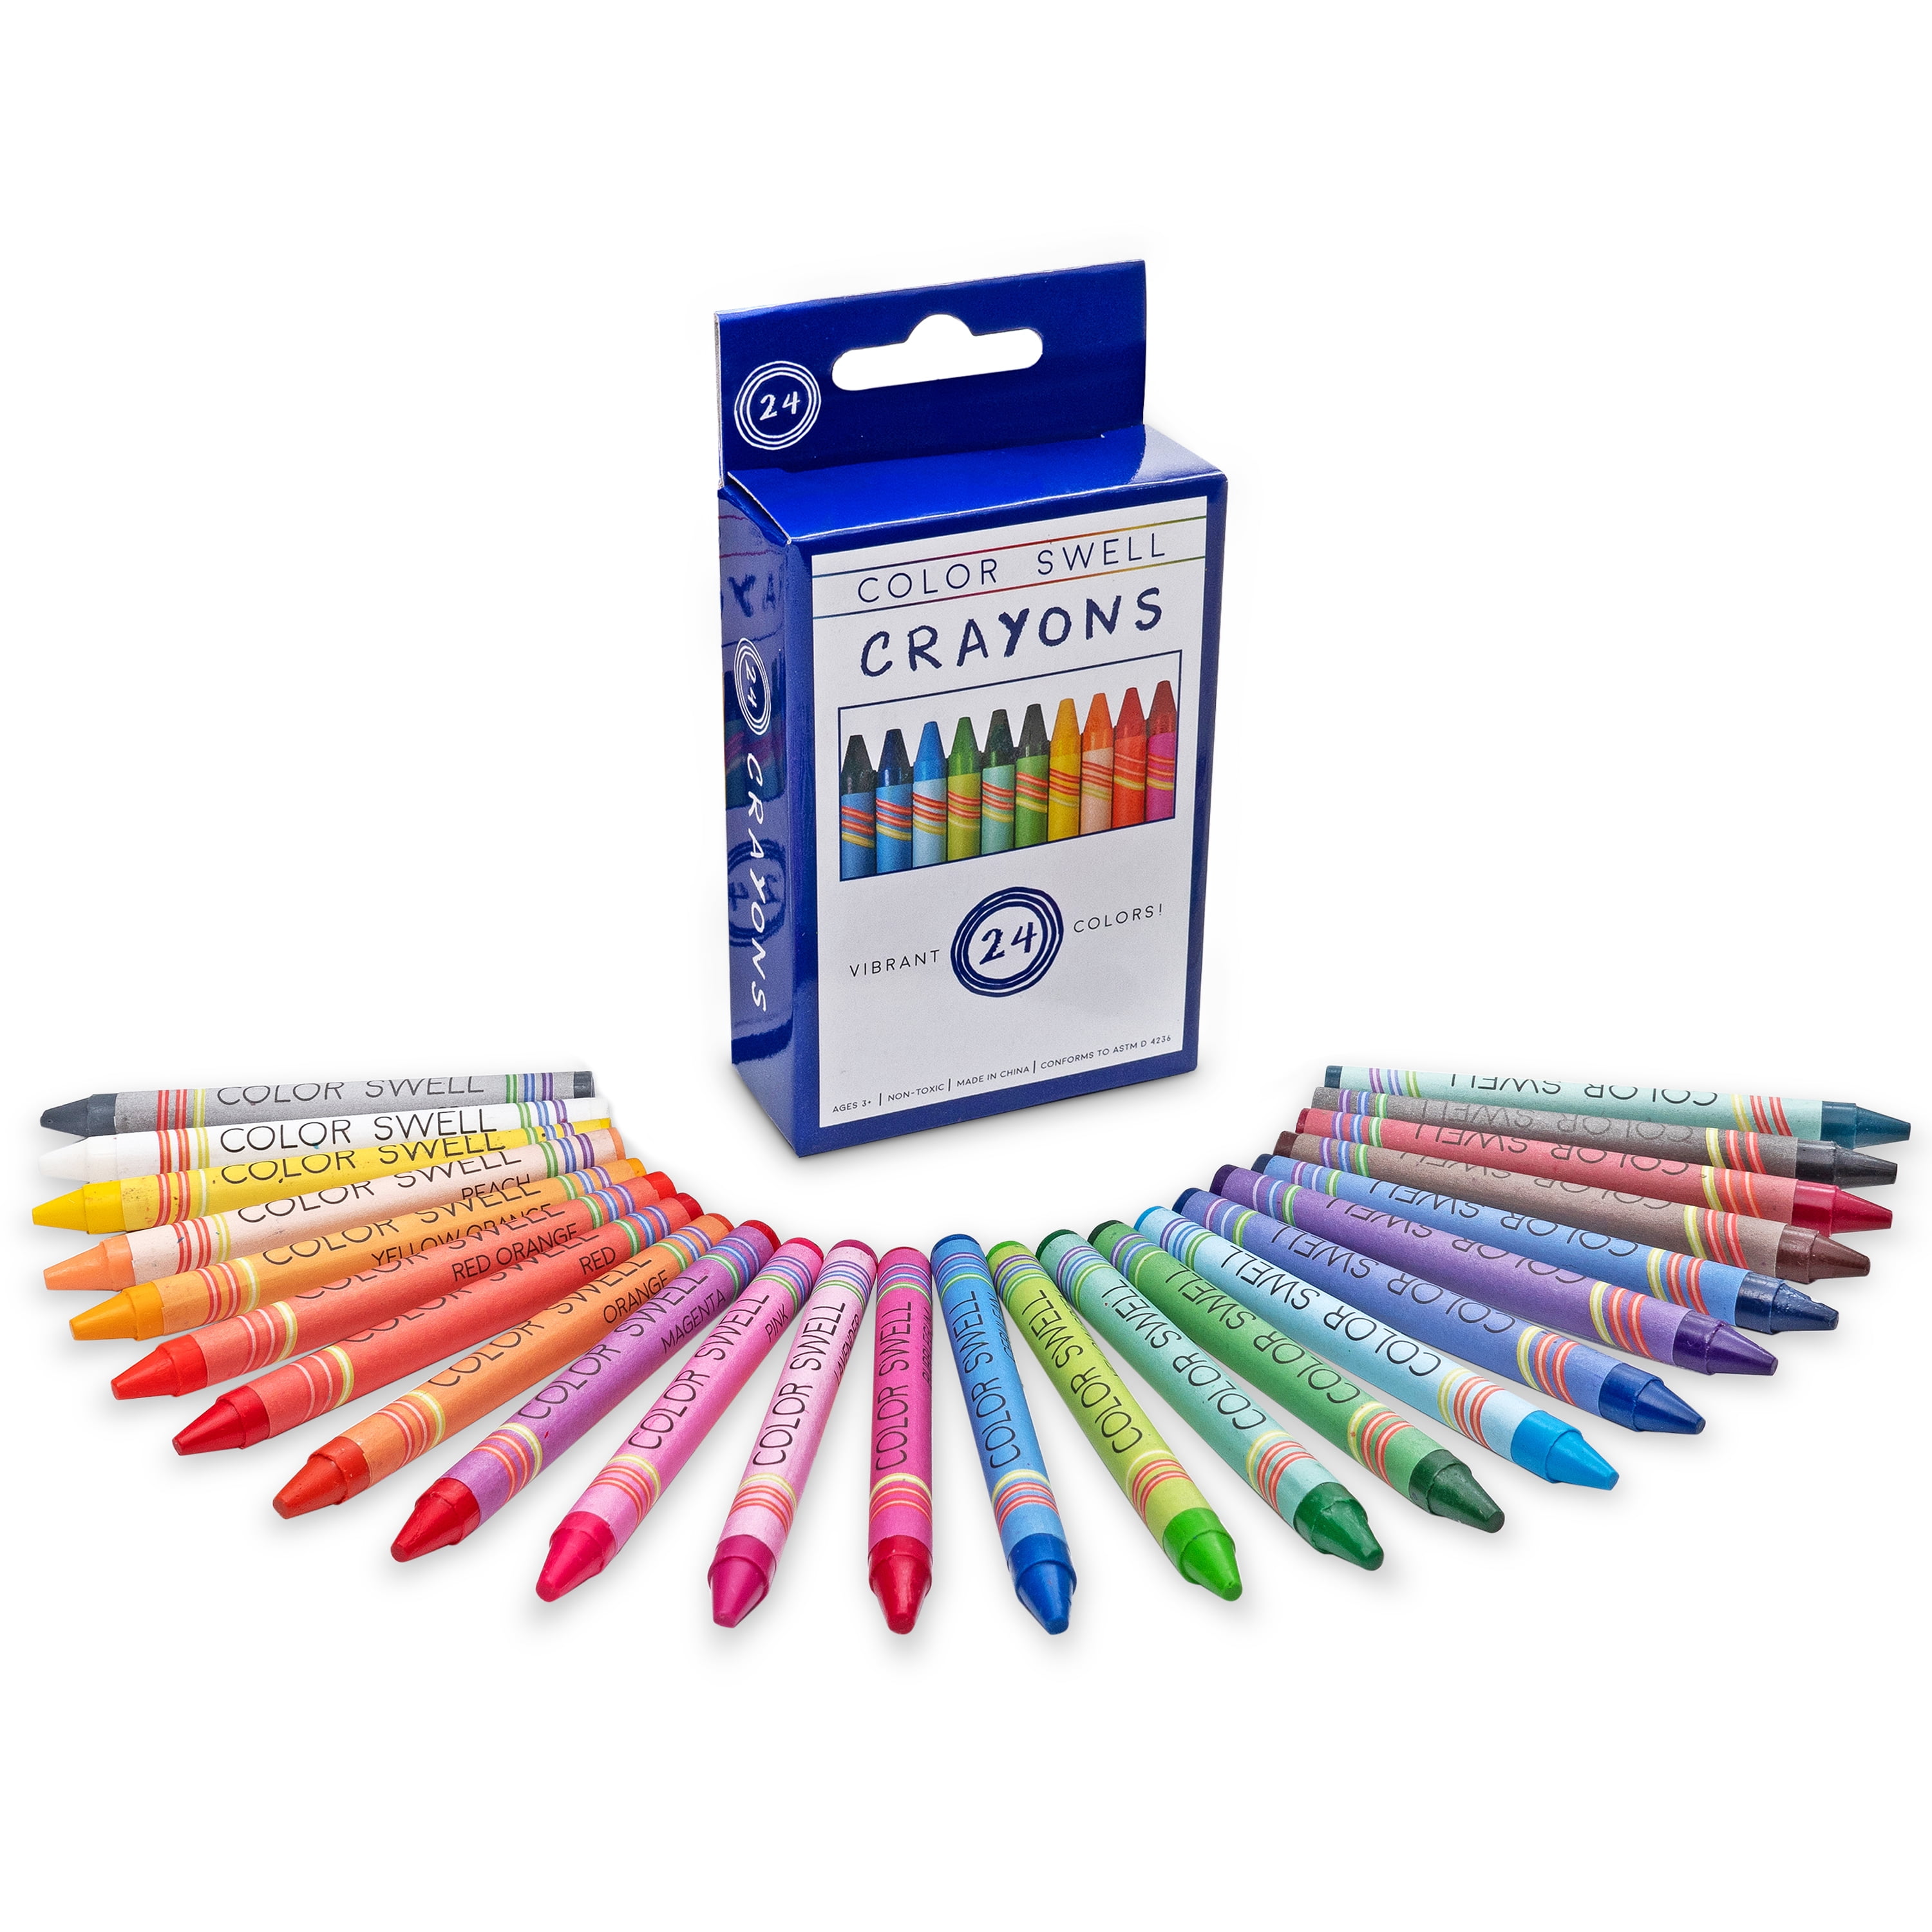 Color Swell Crayons Bulk Packs - 18 Boxes of 24 Vibrant Colored Crayons of  Teacher Quality Durable Classroom Pack for Kids Students Party Favors 